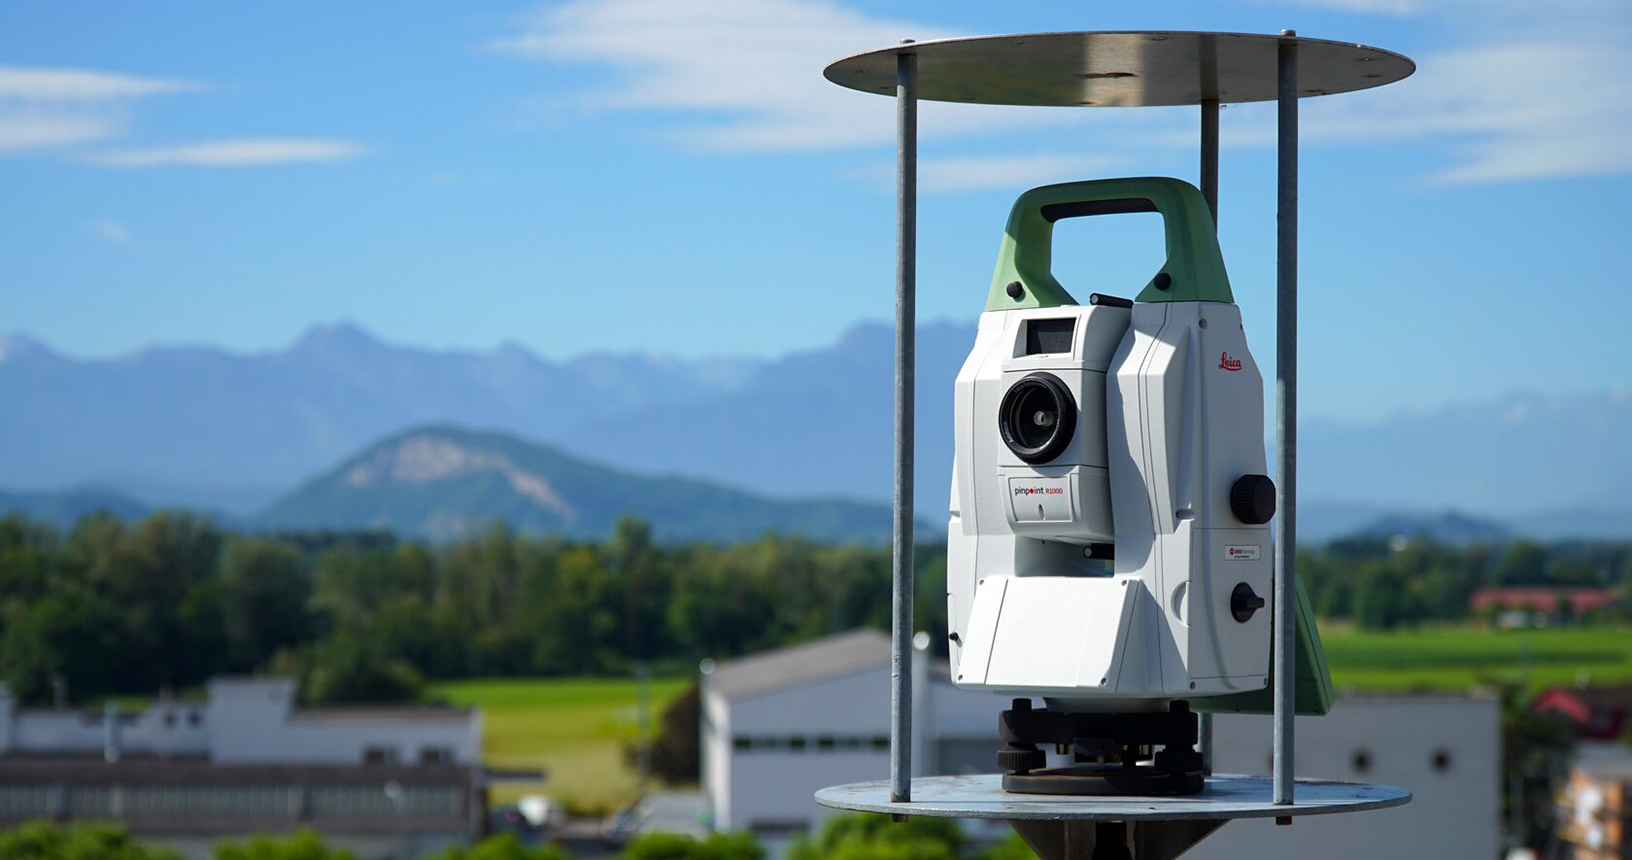 Monitoring total station mounted on a bridge